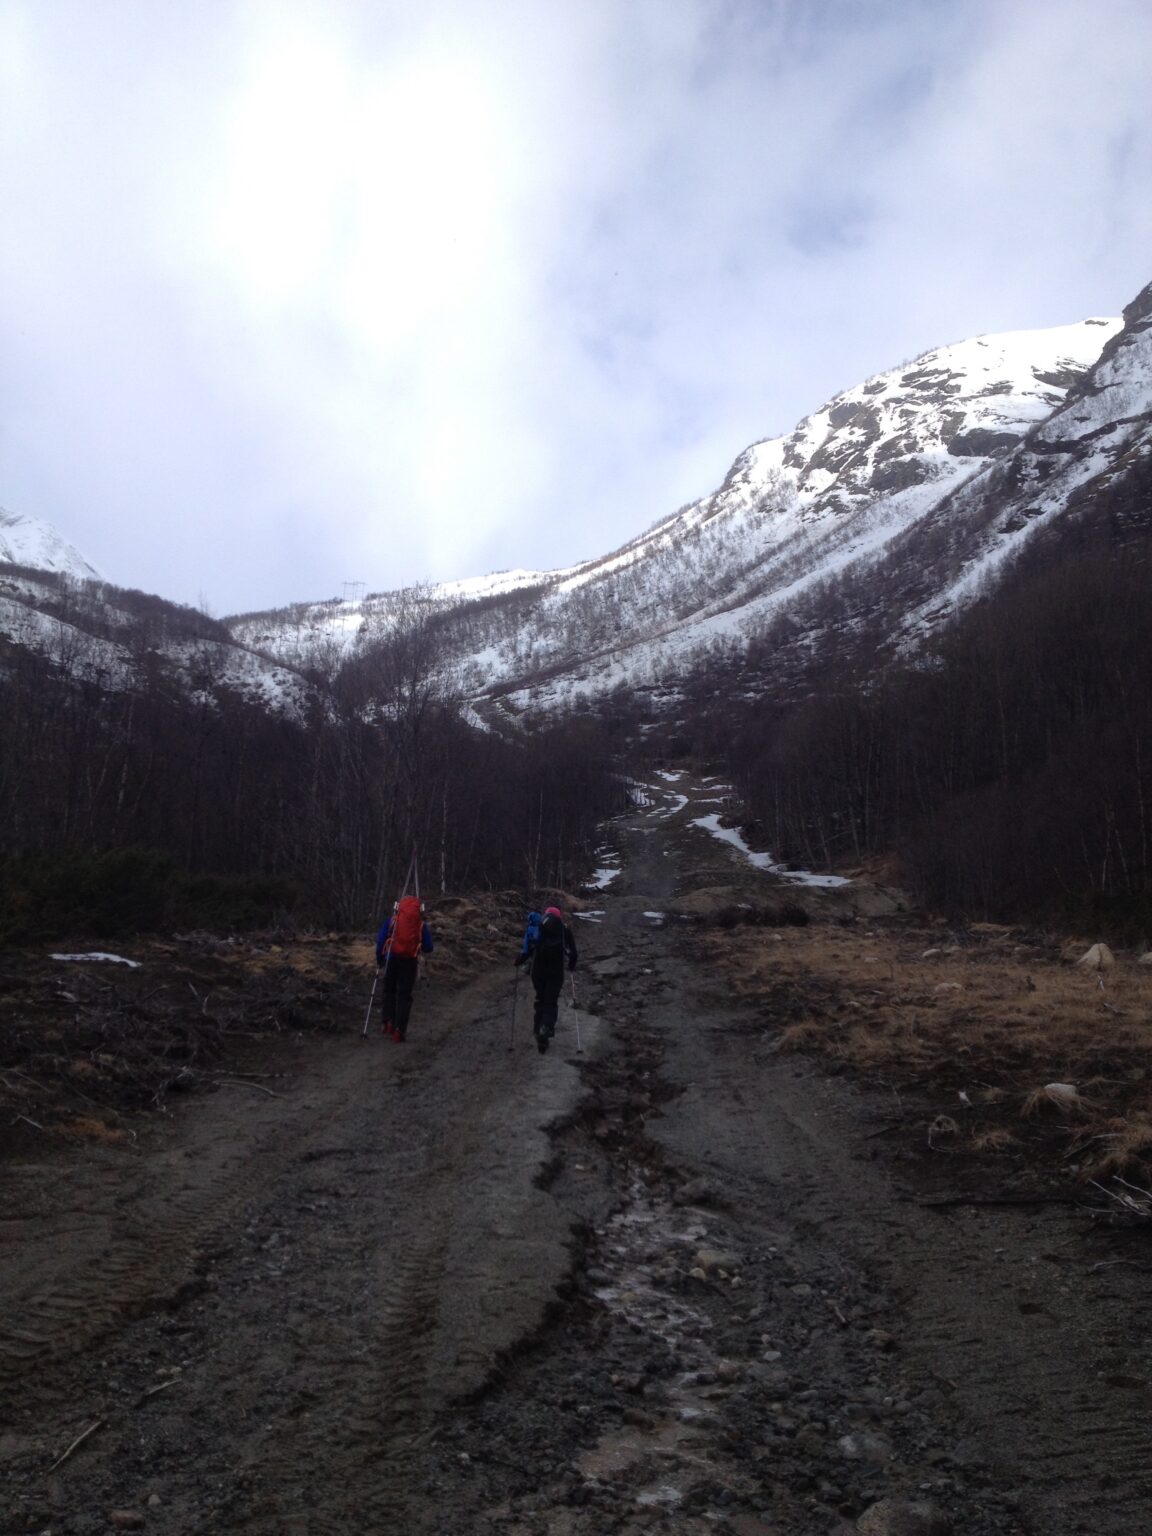 Hiking up the road to the base of Gangnesaksla